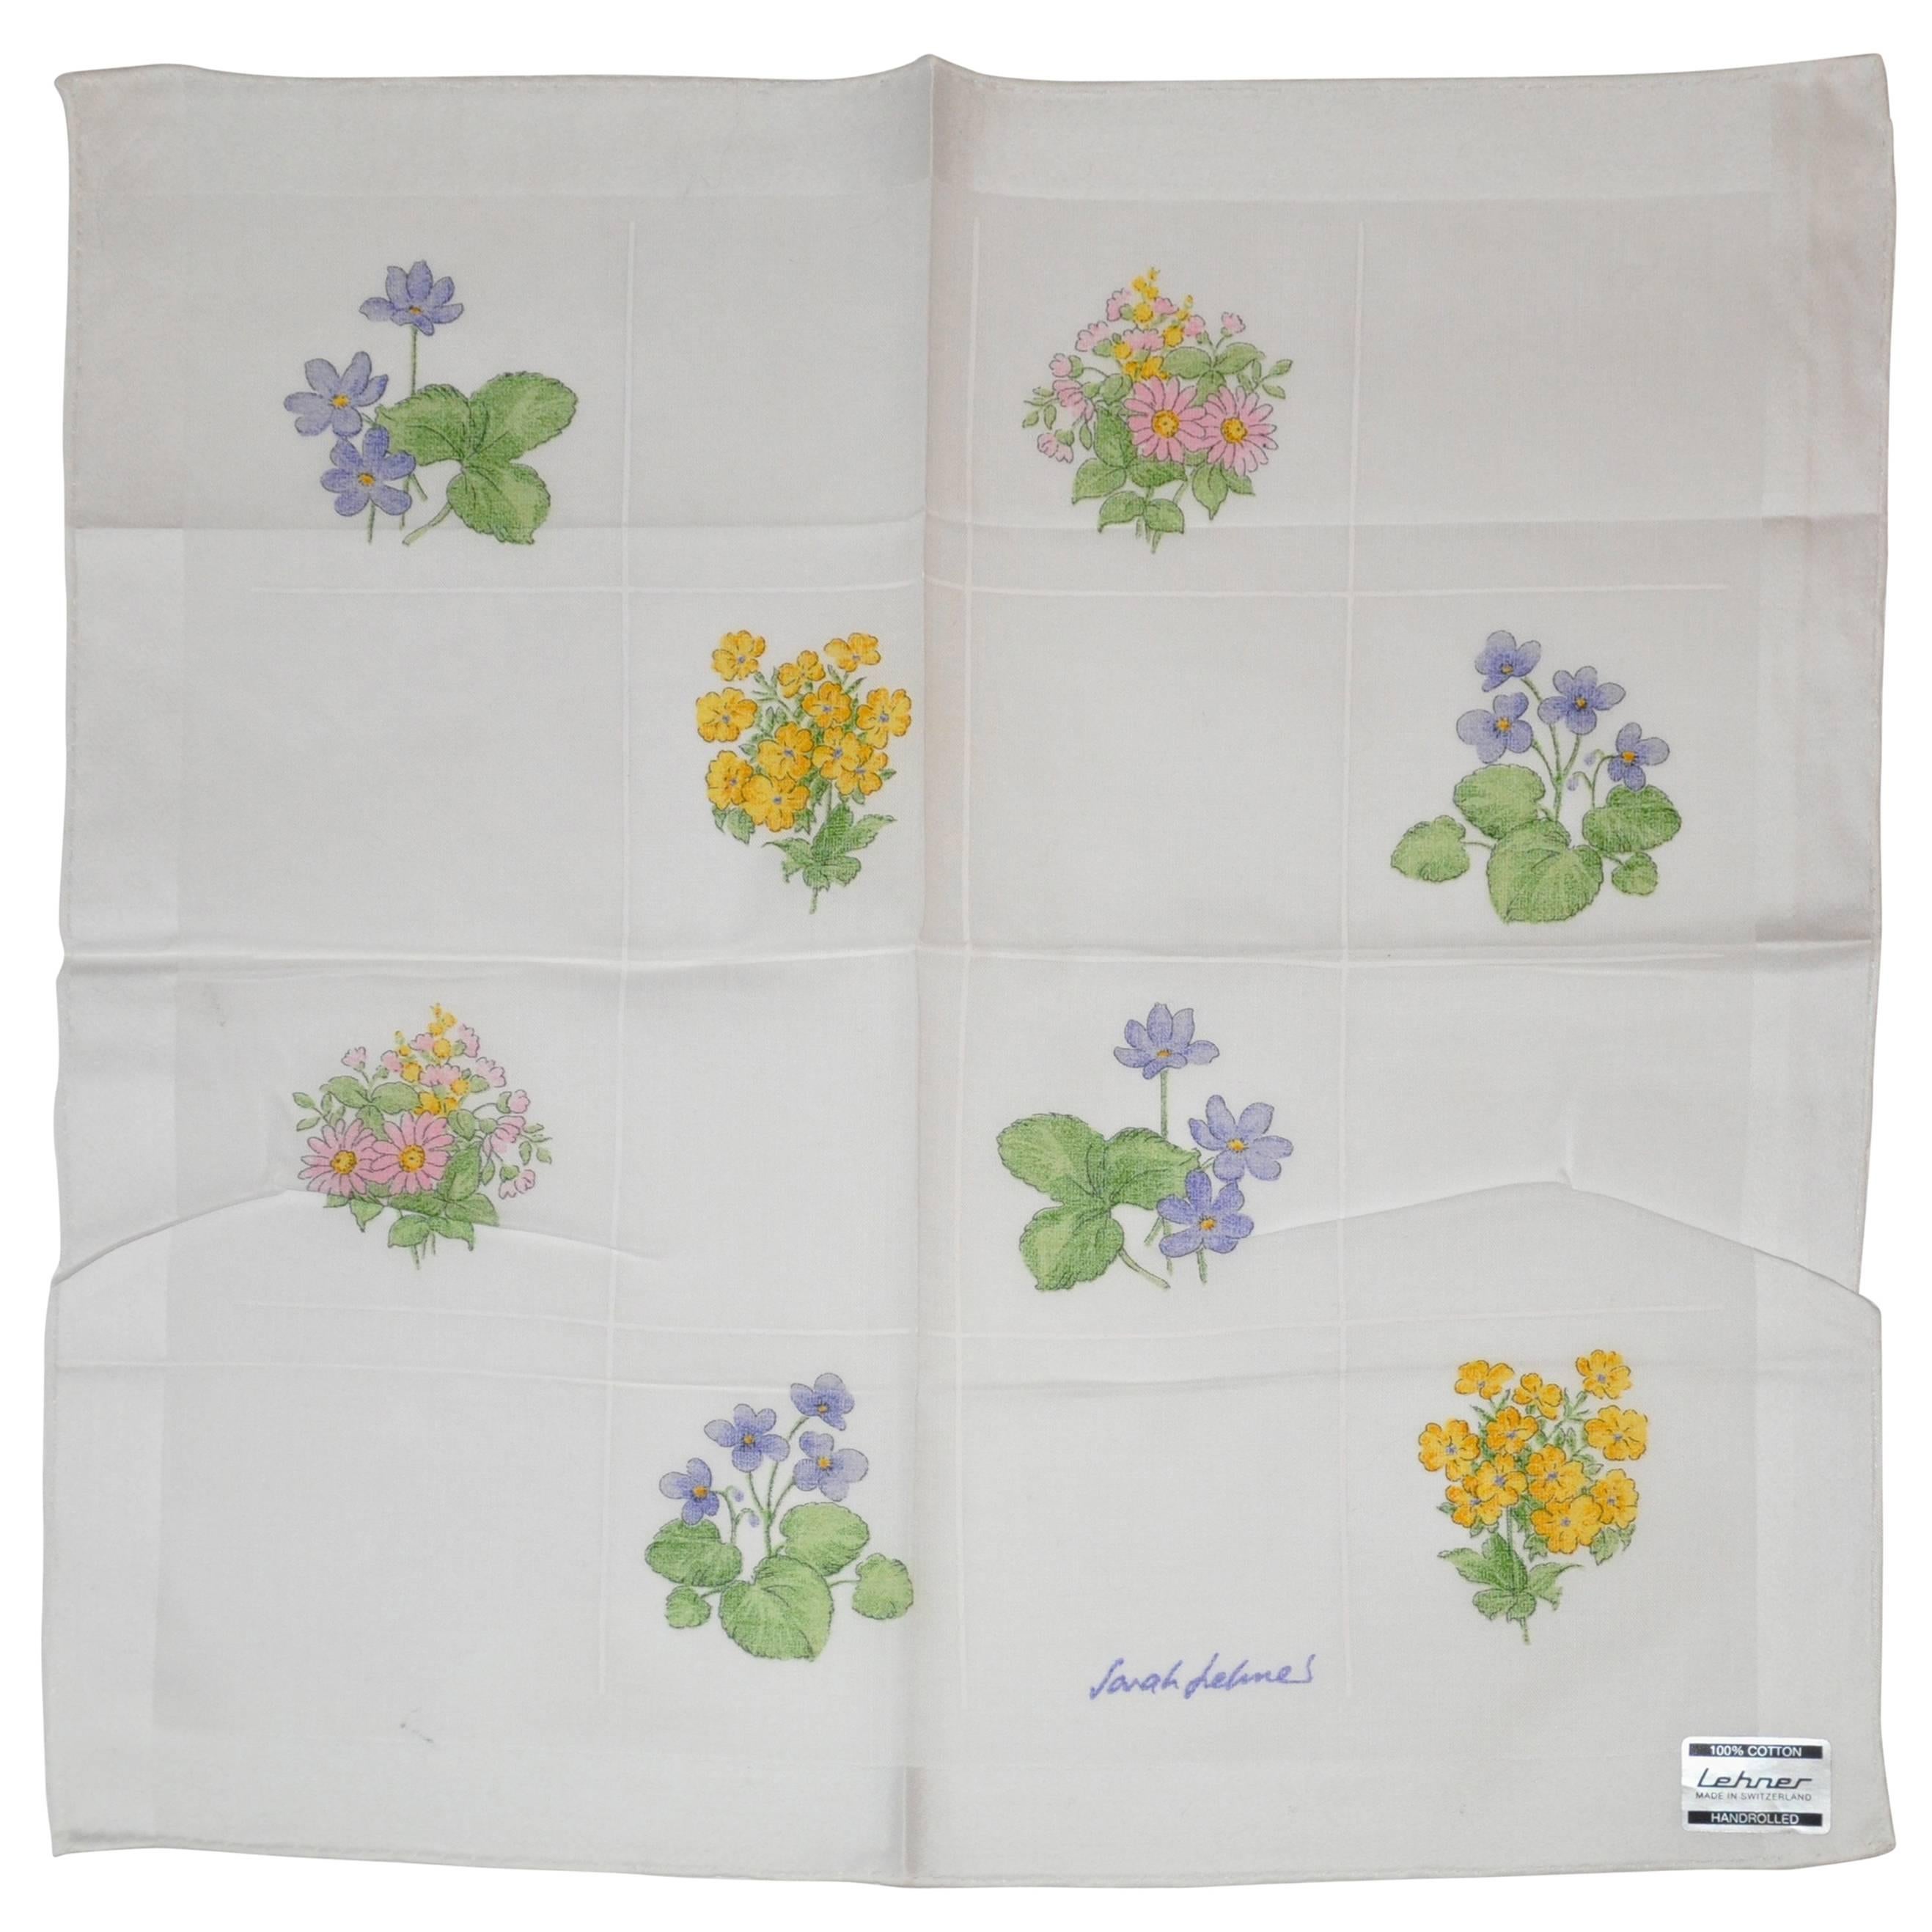 Sarah Lelines Hand-Stitched 100% Cotton "Floral Collection" Handkerchief For Sale